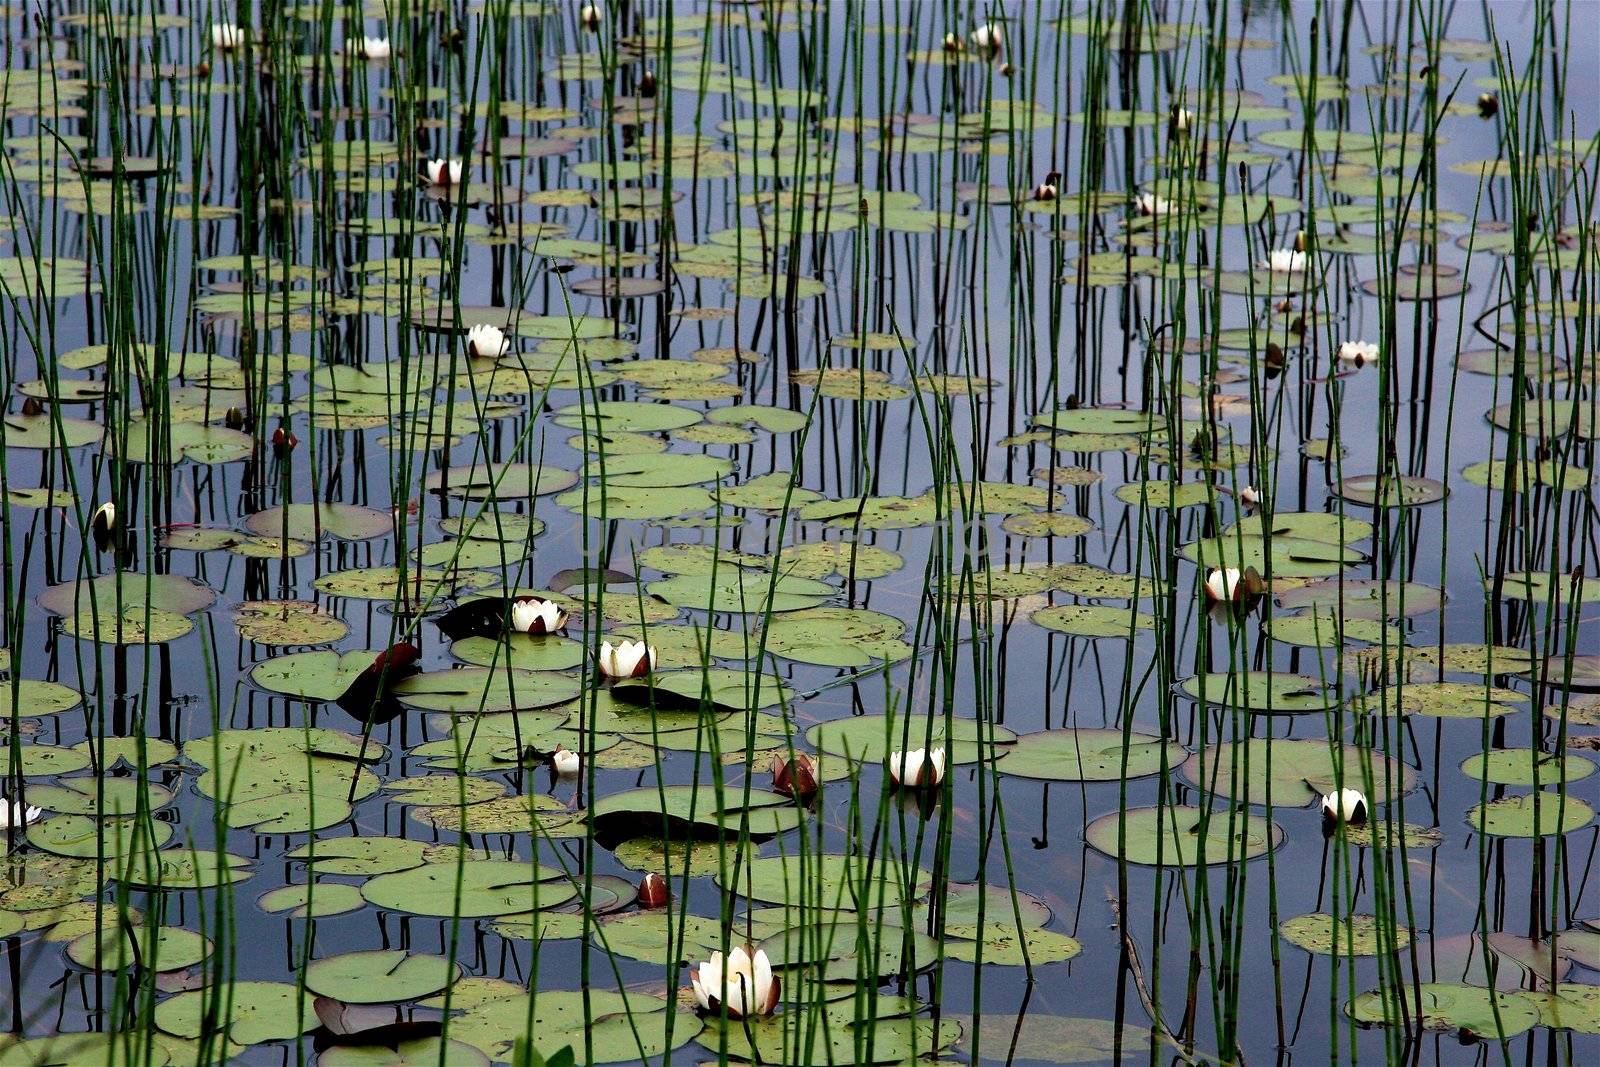 lake / pond with lotuslake / pond with lotus by Bildehagen